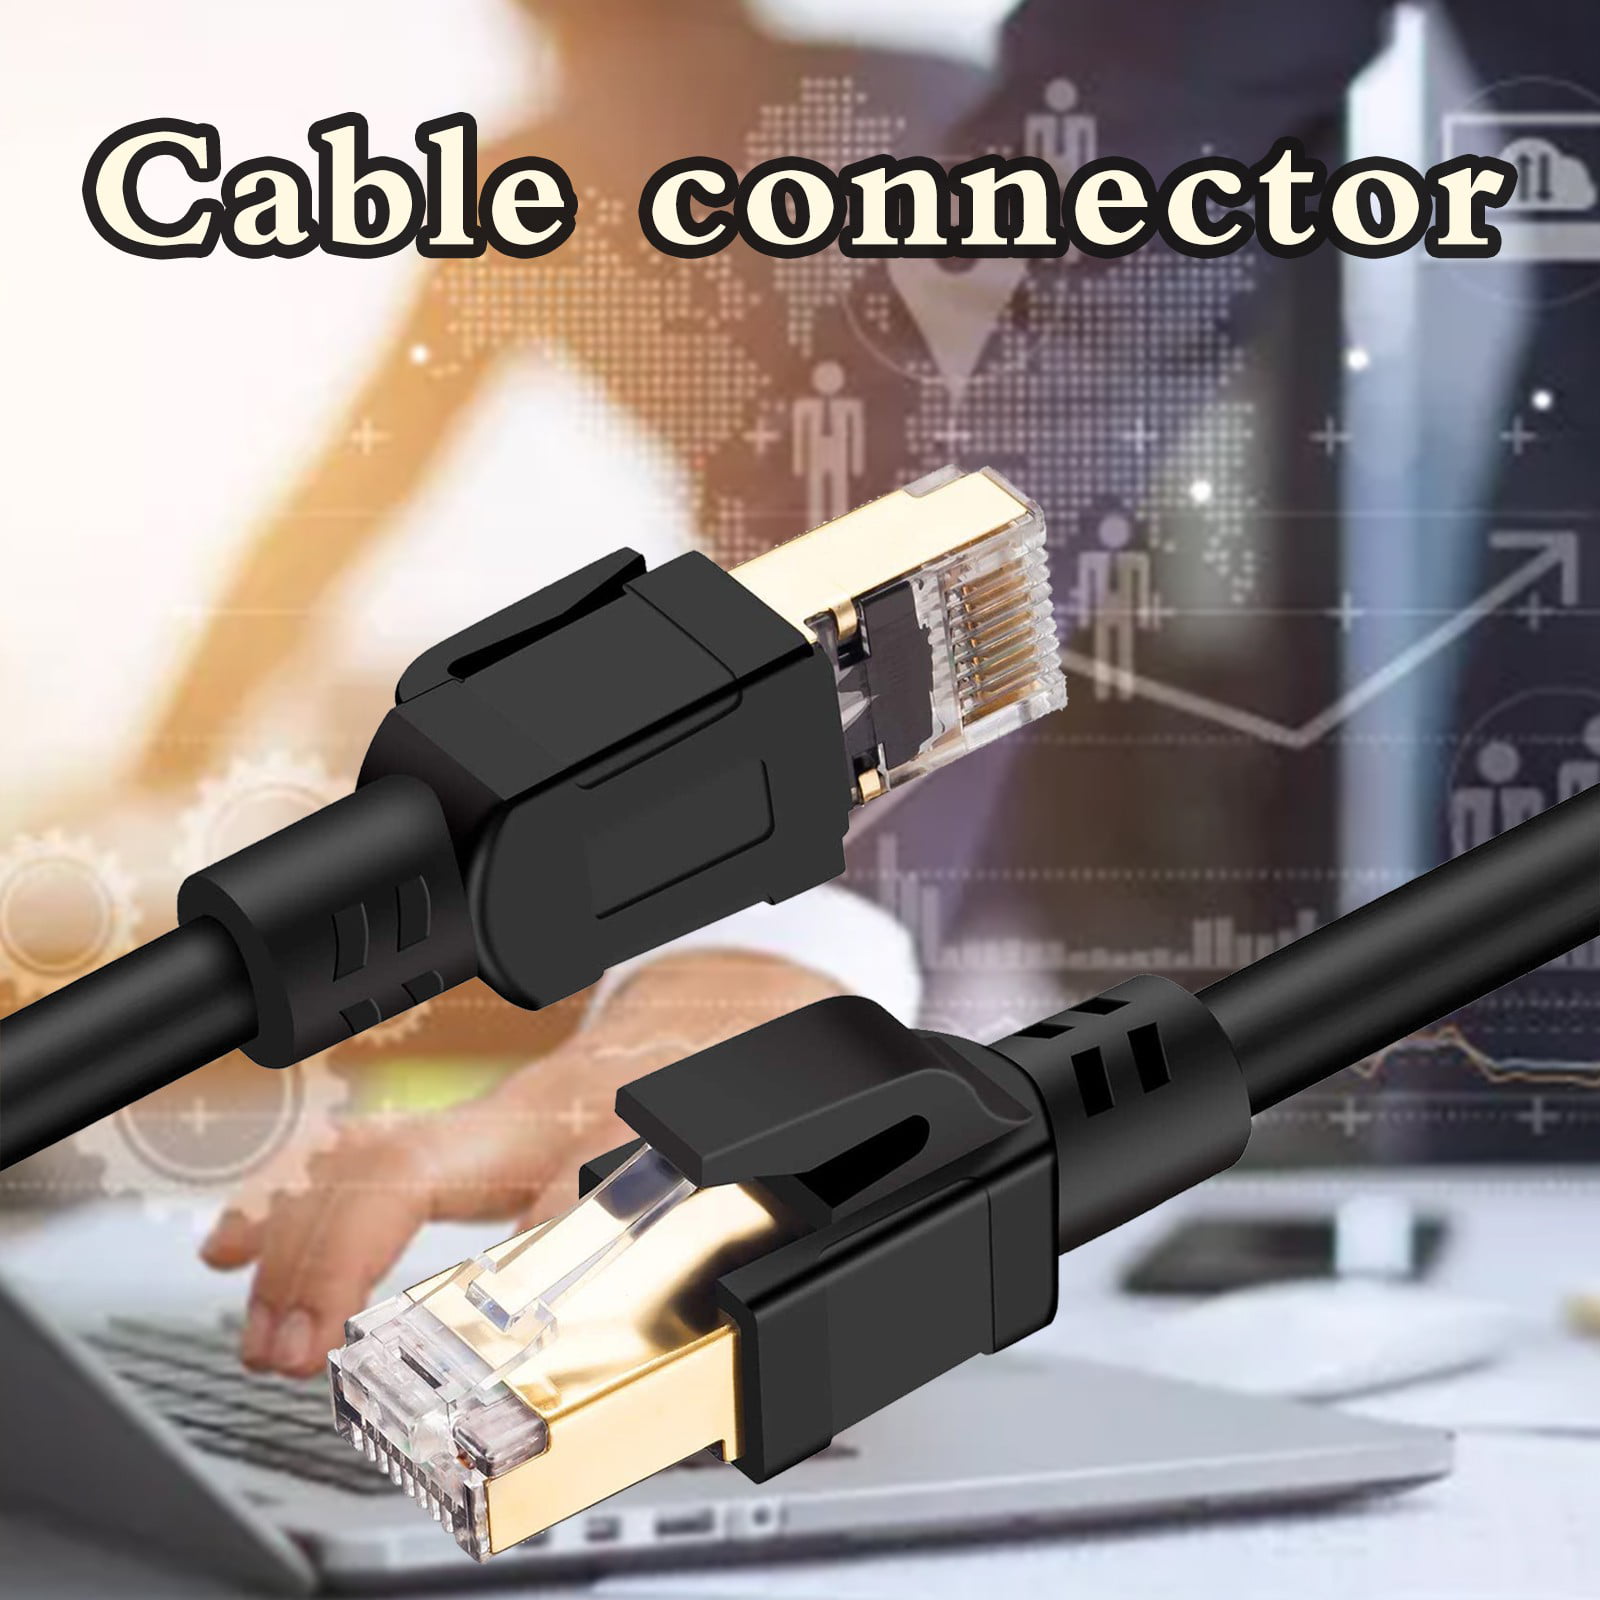 High Speed LAN Wire with Rj45 Connectors for Modems LAN and Gaming Faster Than Cat5/Cat5e/Cat6 Black Pier Telecom 10ft Ethernet Cable Cat7 Flat Patch Cord for Internet Network Computer 